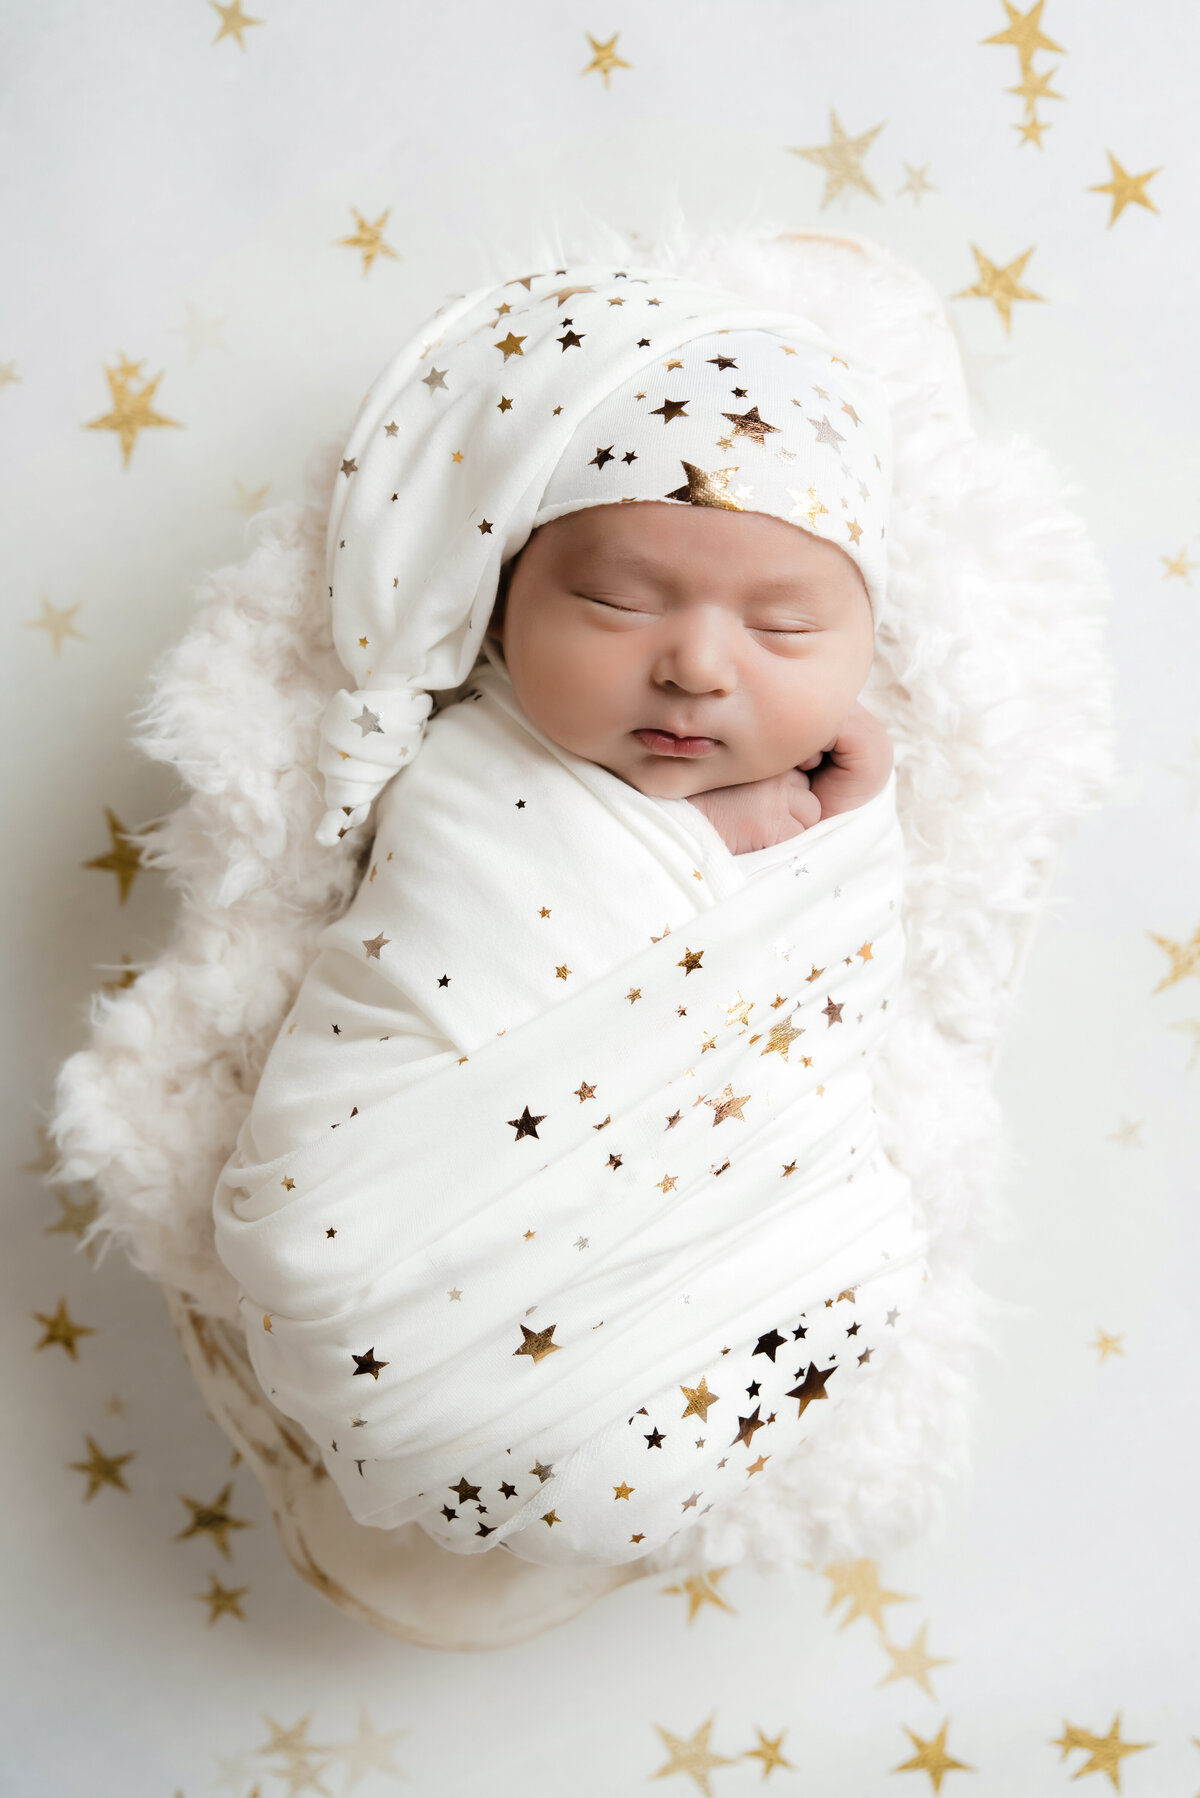 Newborn baby wrapped in star wrap sleeping in wooden bowl on star backdrop